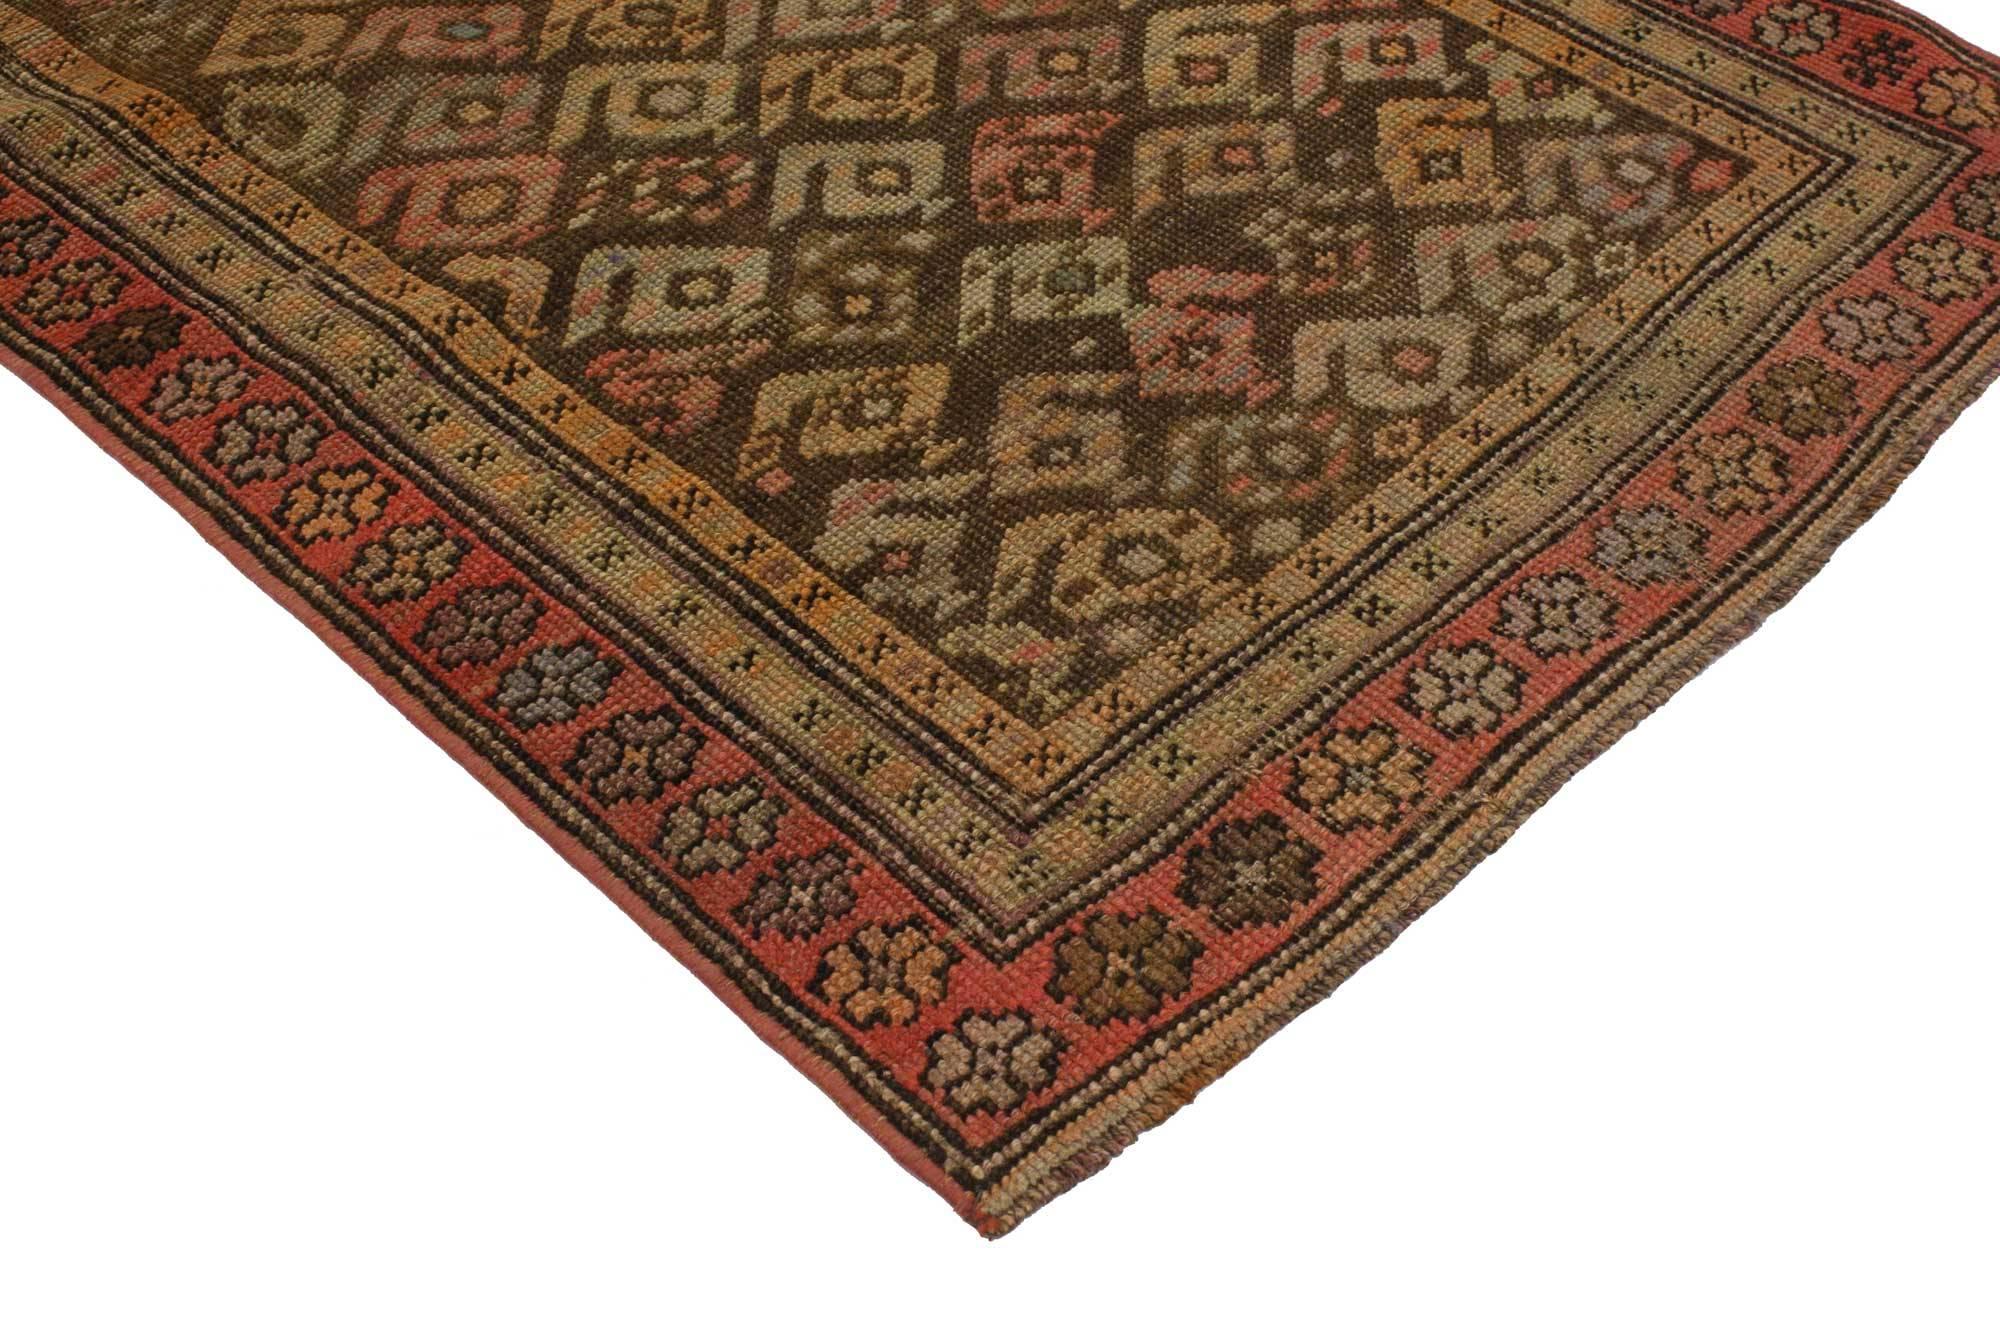 51721, vintage Turkish Oushak runner with craftsman style, short hallway runner. This hand knotted wool vintage Turkish Oushak runner features an all-over geometric boteh pattern spread across an abrashed coffee colored field. The widely used boteh